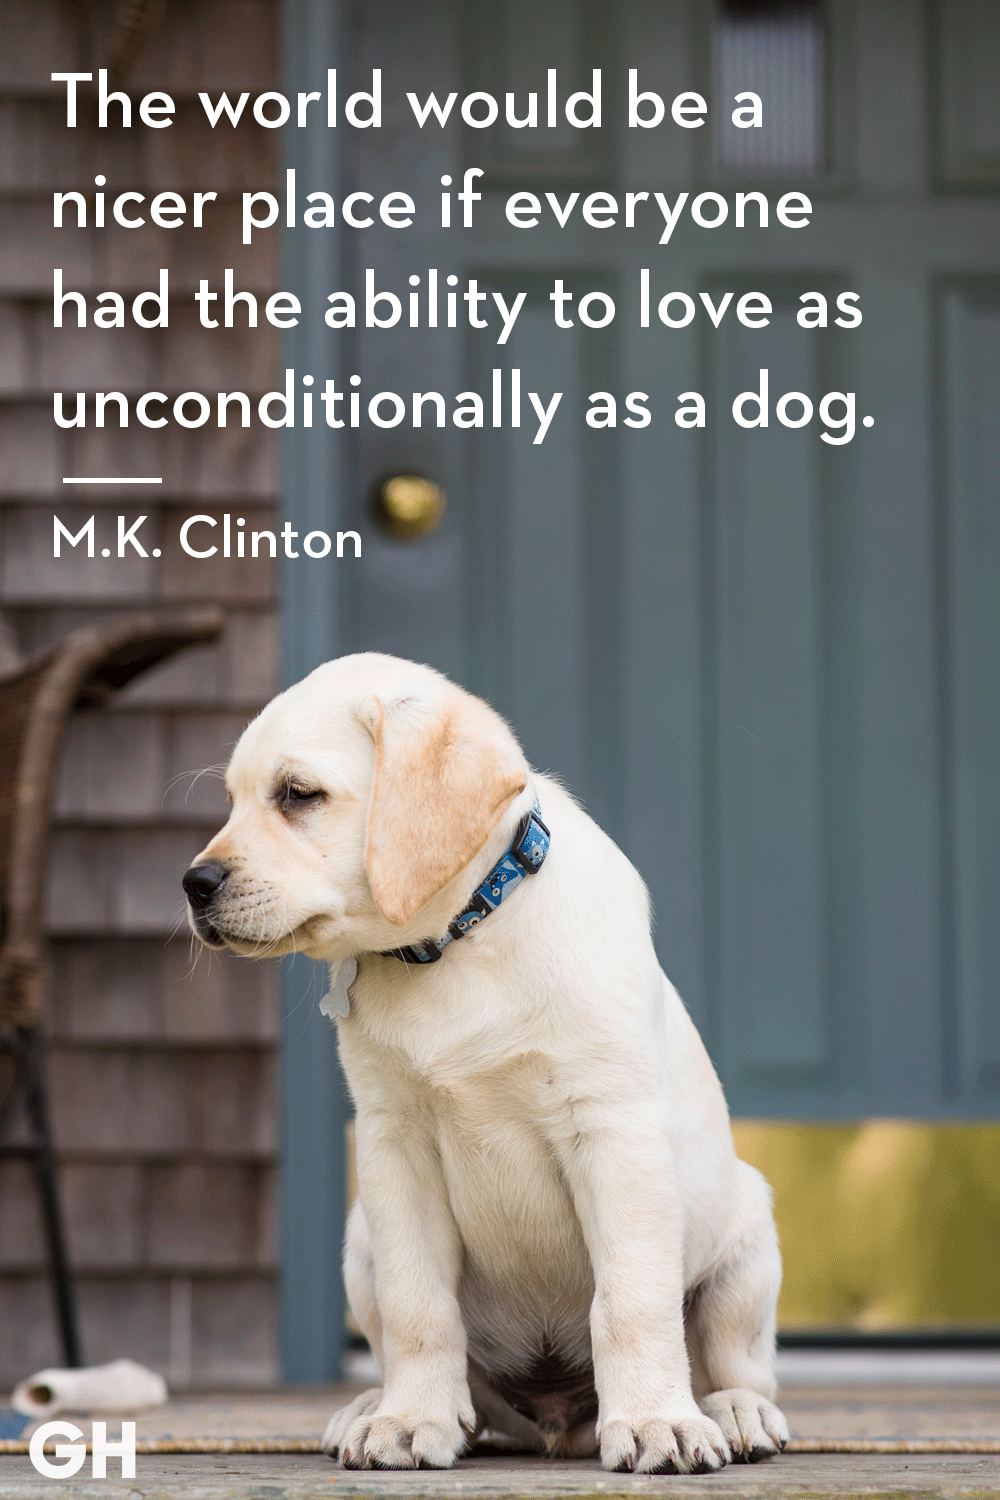 30 Dog Quotes That Every Animal Lover Will Relate To - Best Dog Quotes